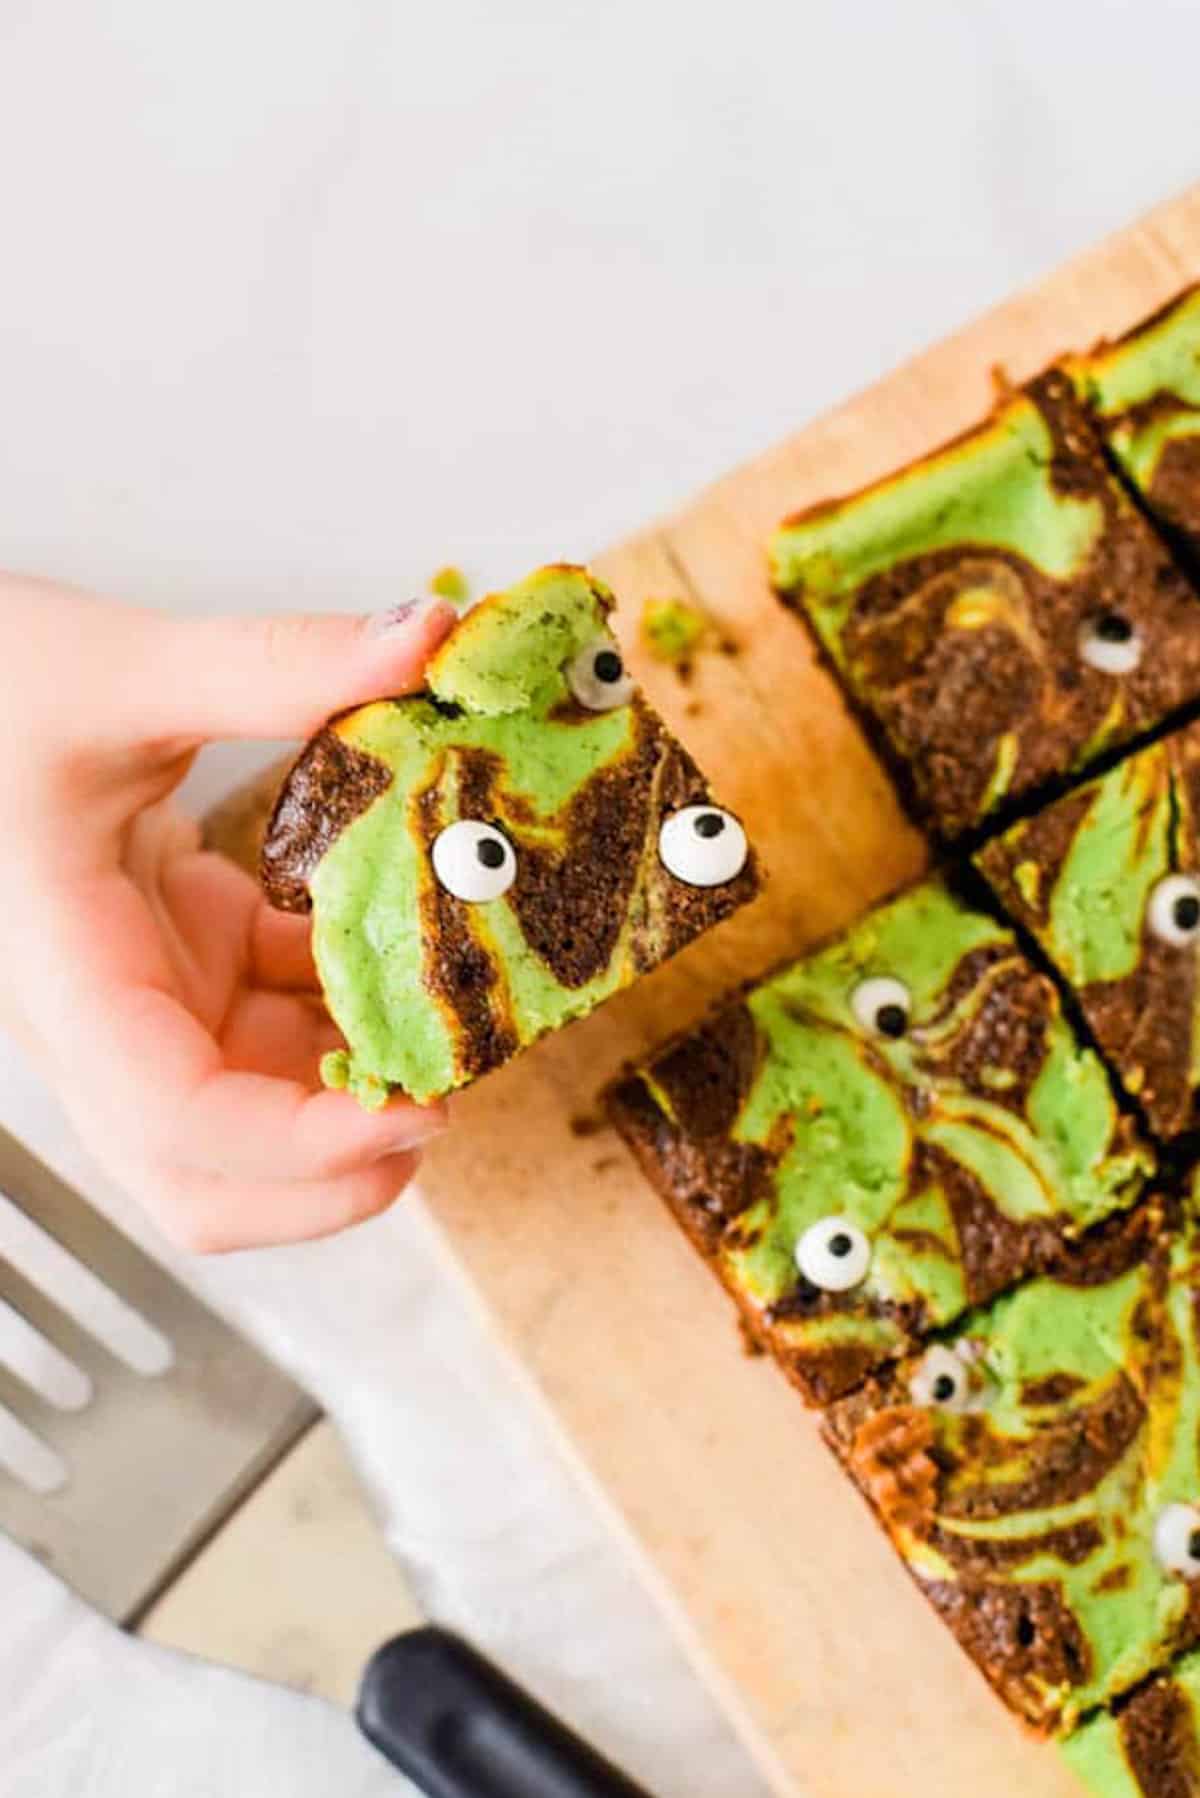 green swirled brownies with candy eyes